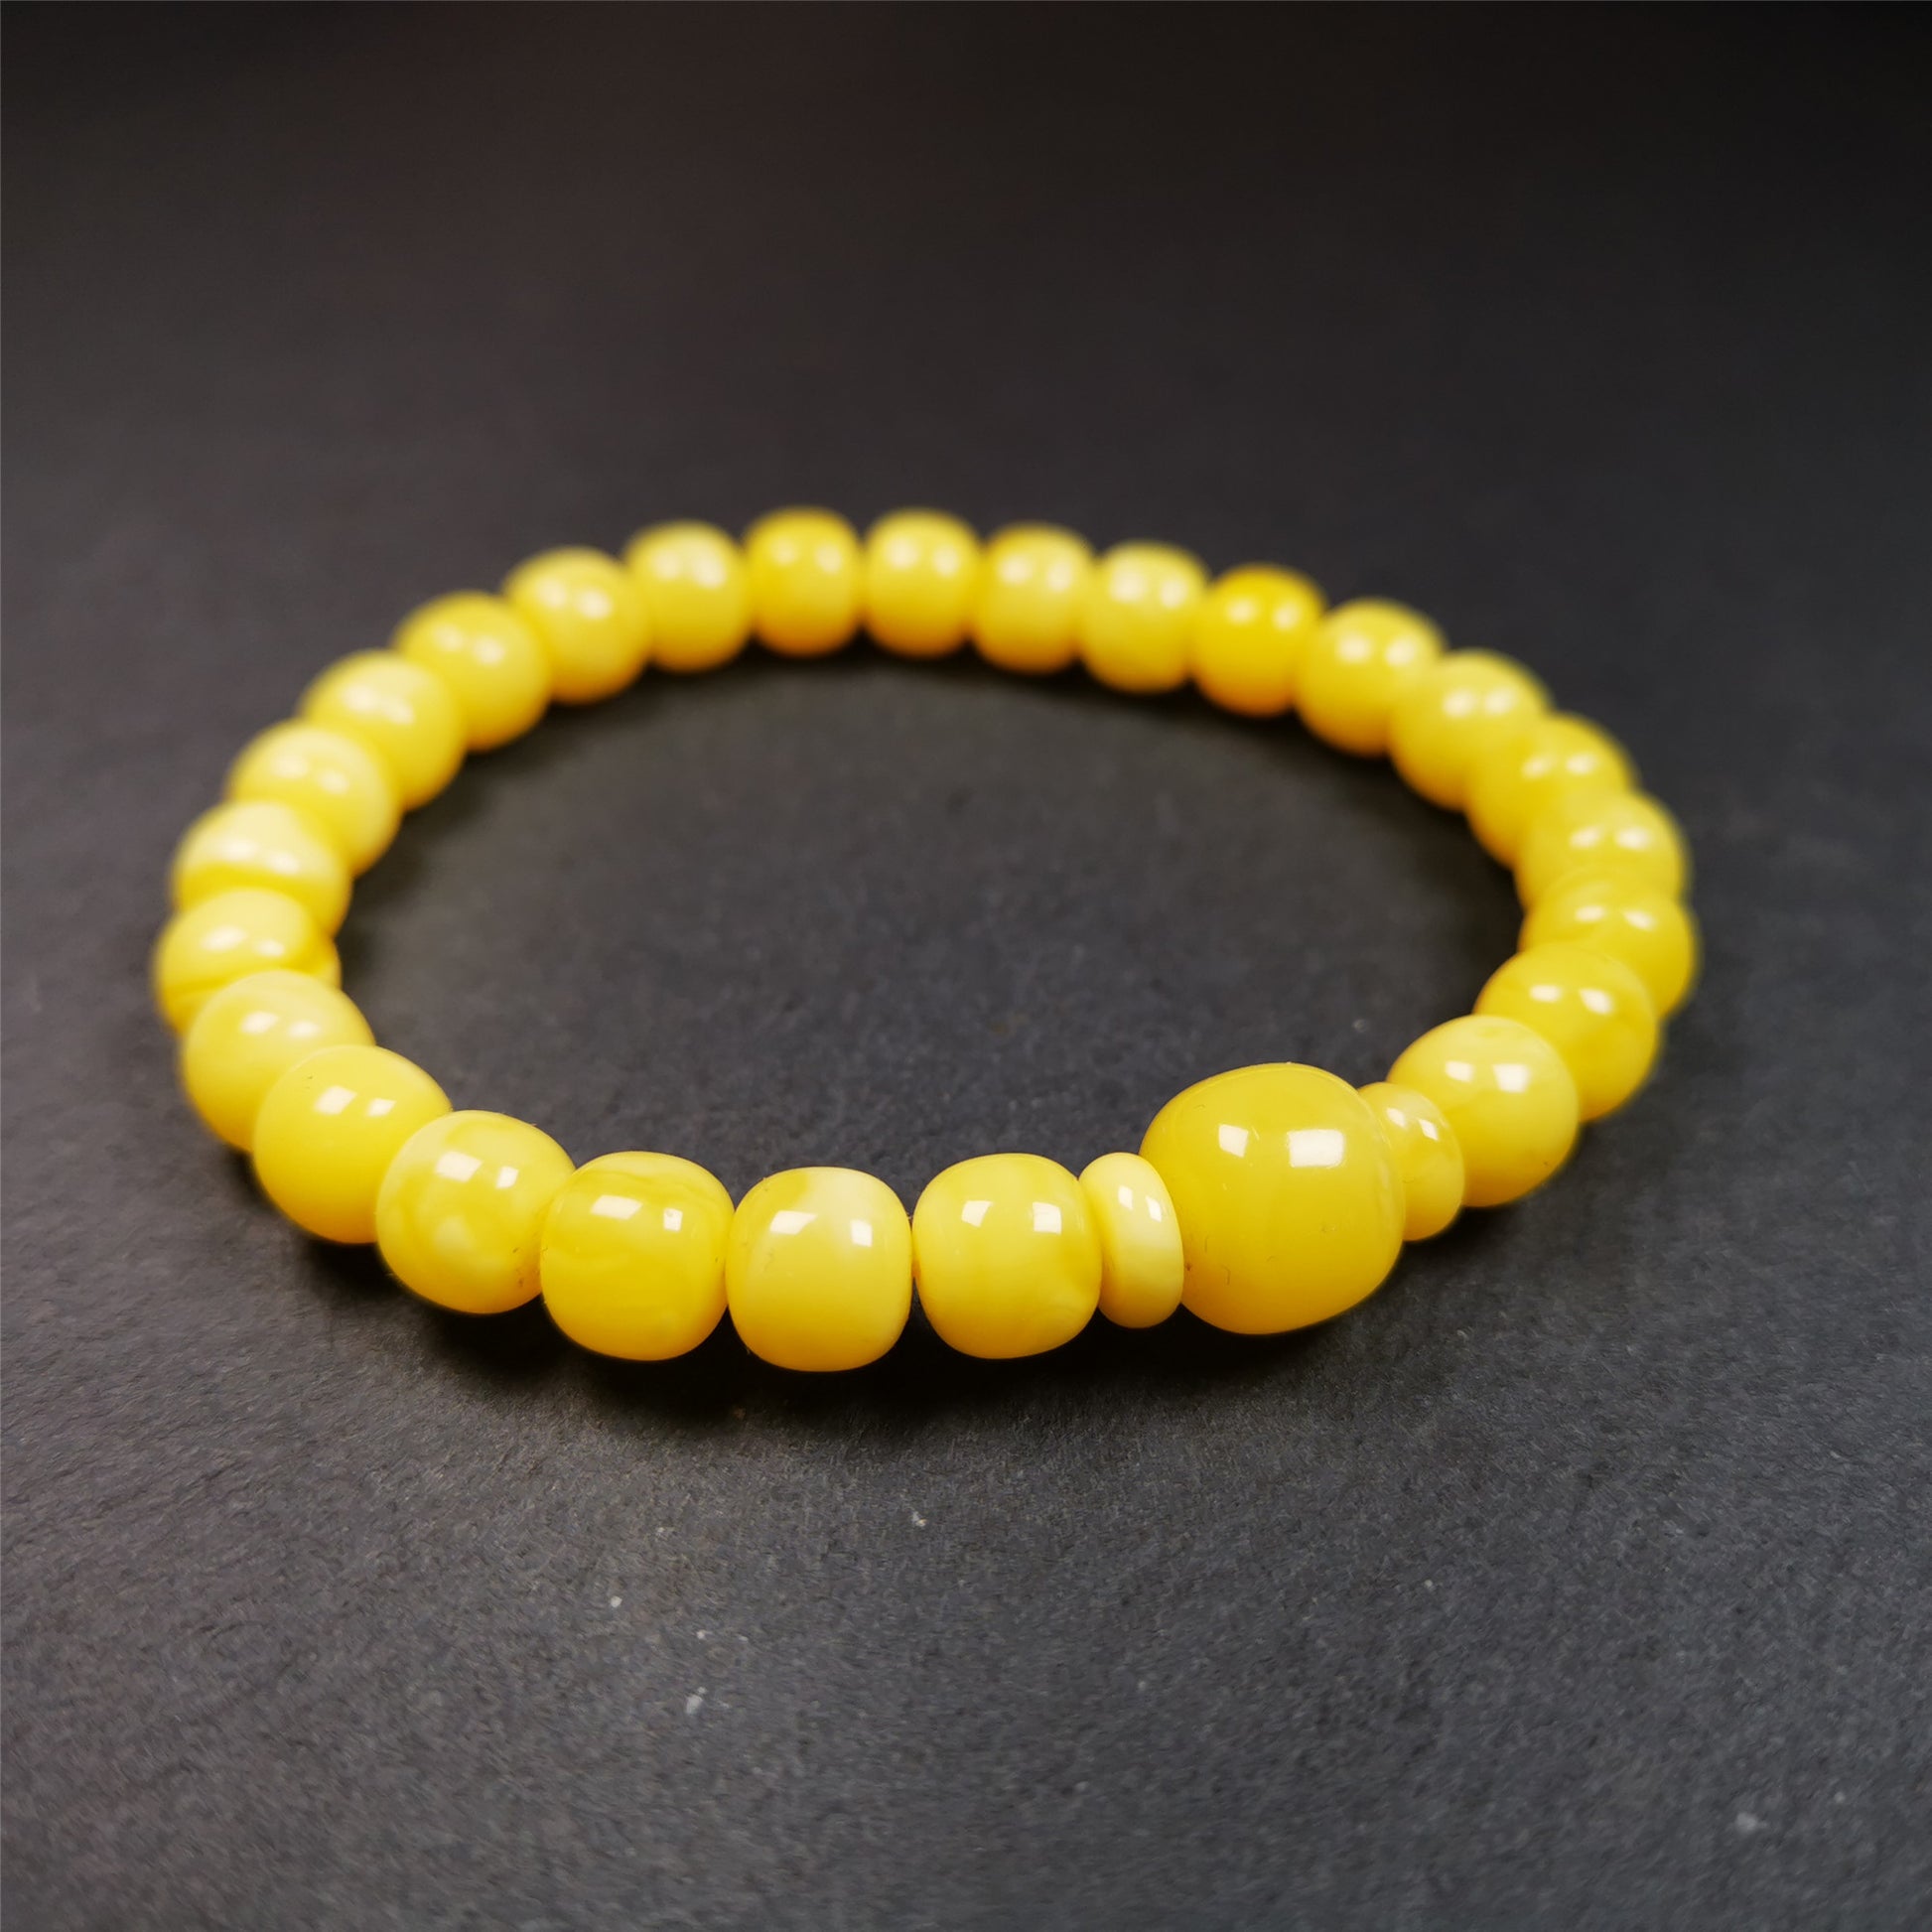 This amber beads bracelet was hand-woven by Tibetans from Baiyu County,Tibet. It is made of amber, yellow color,consists 1 main bead,25 small beads and 2 spacer beads,tie with elastic cord to fit your wrist.